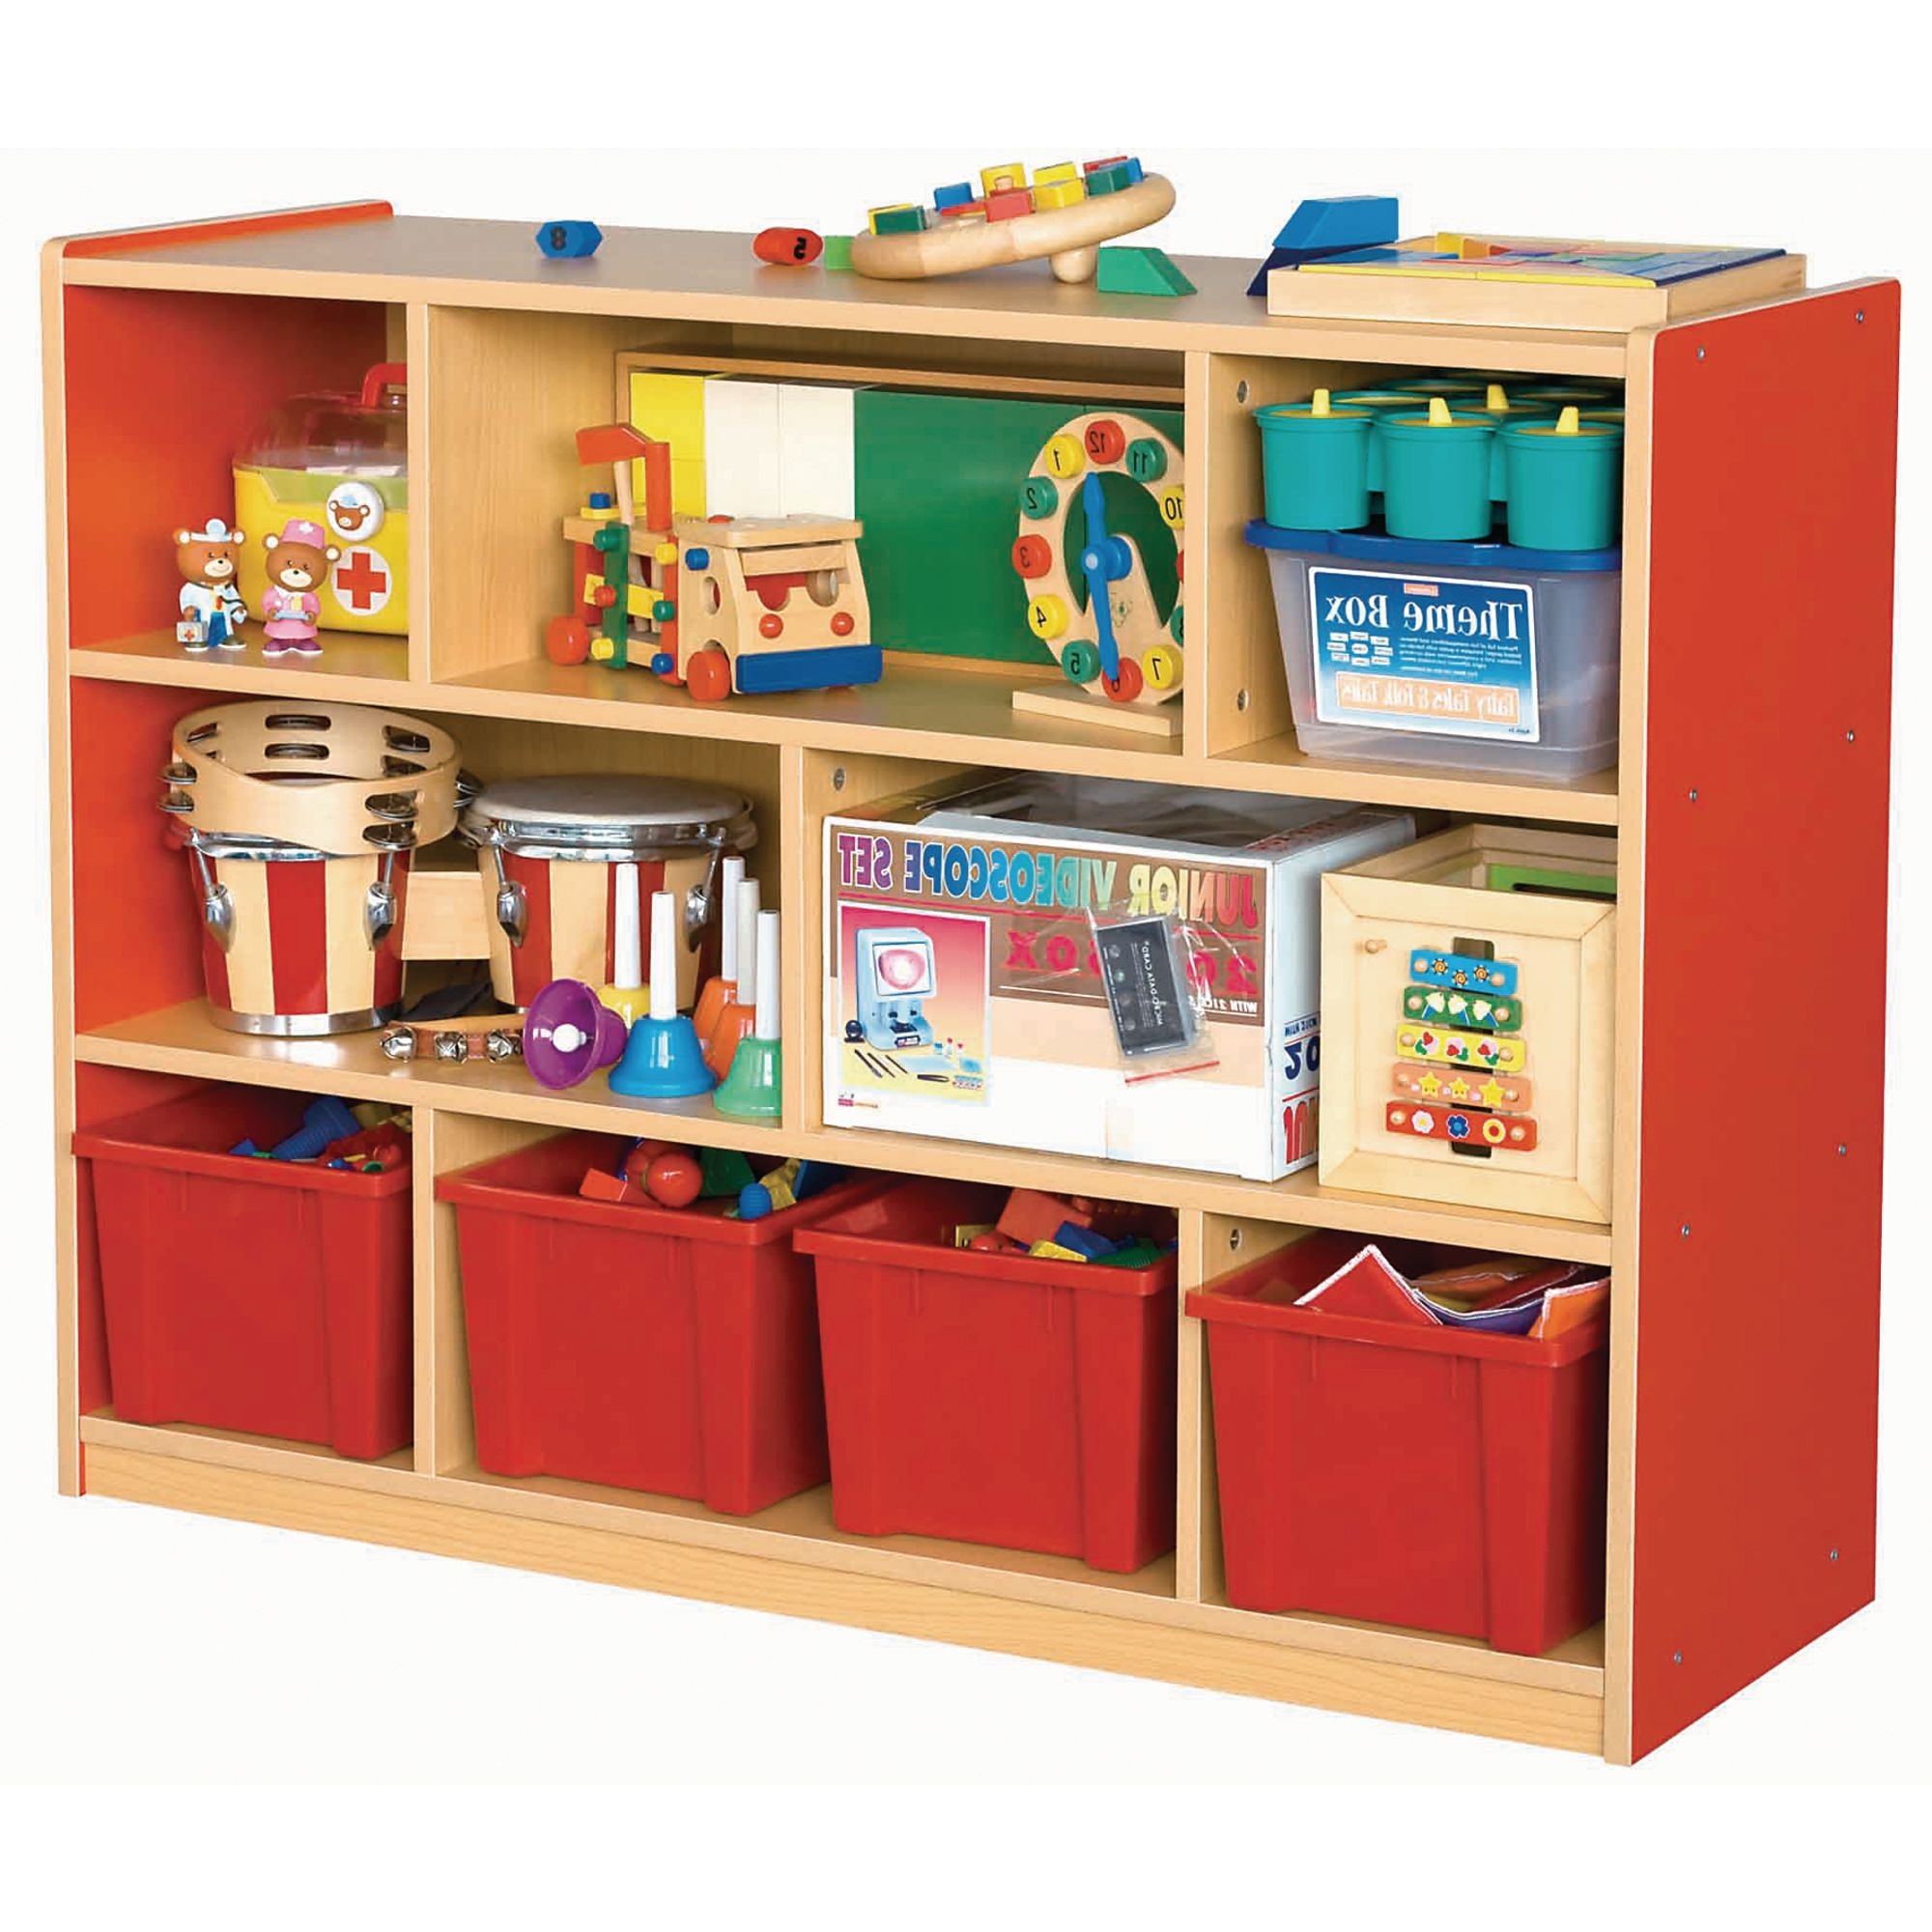 Milan 8 Compartment Cabinet - Red